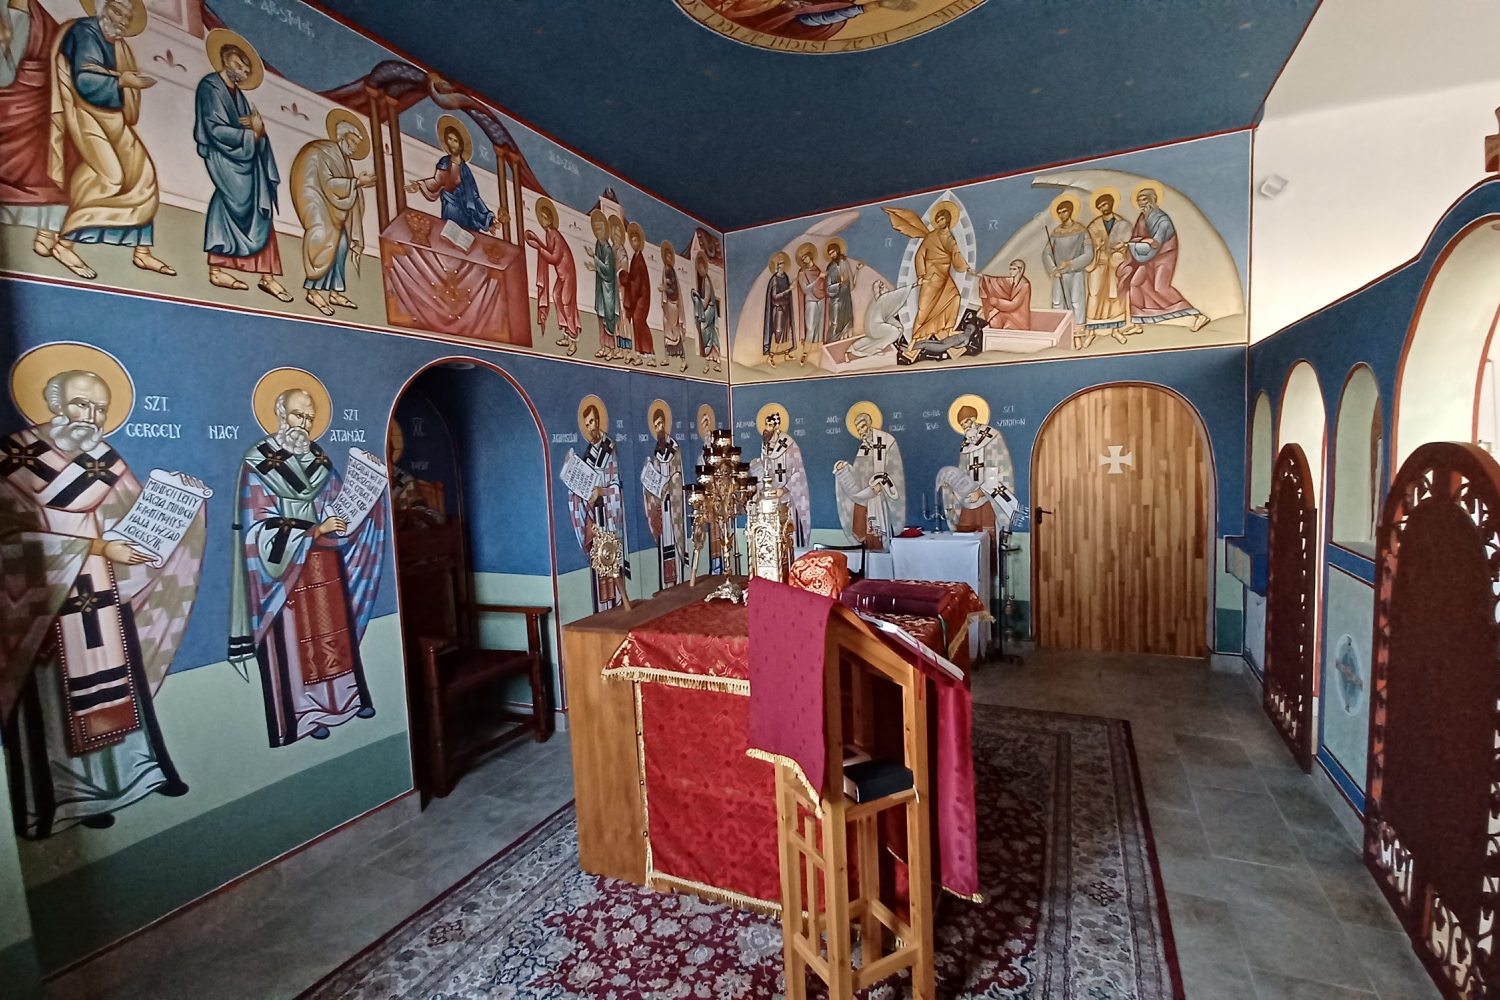 The murals of Mihály Vajda in the Greek Catholic Chapel of Eger